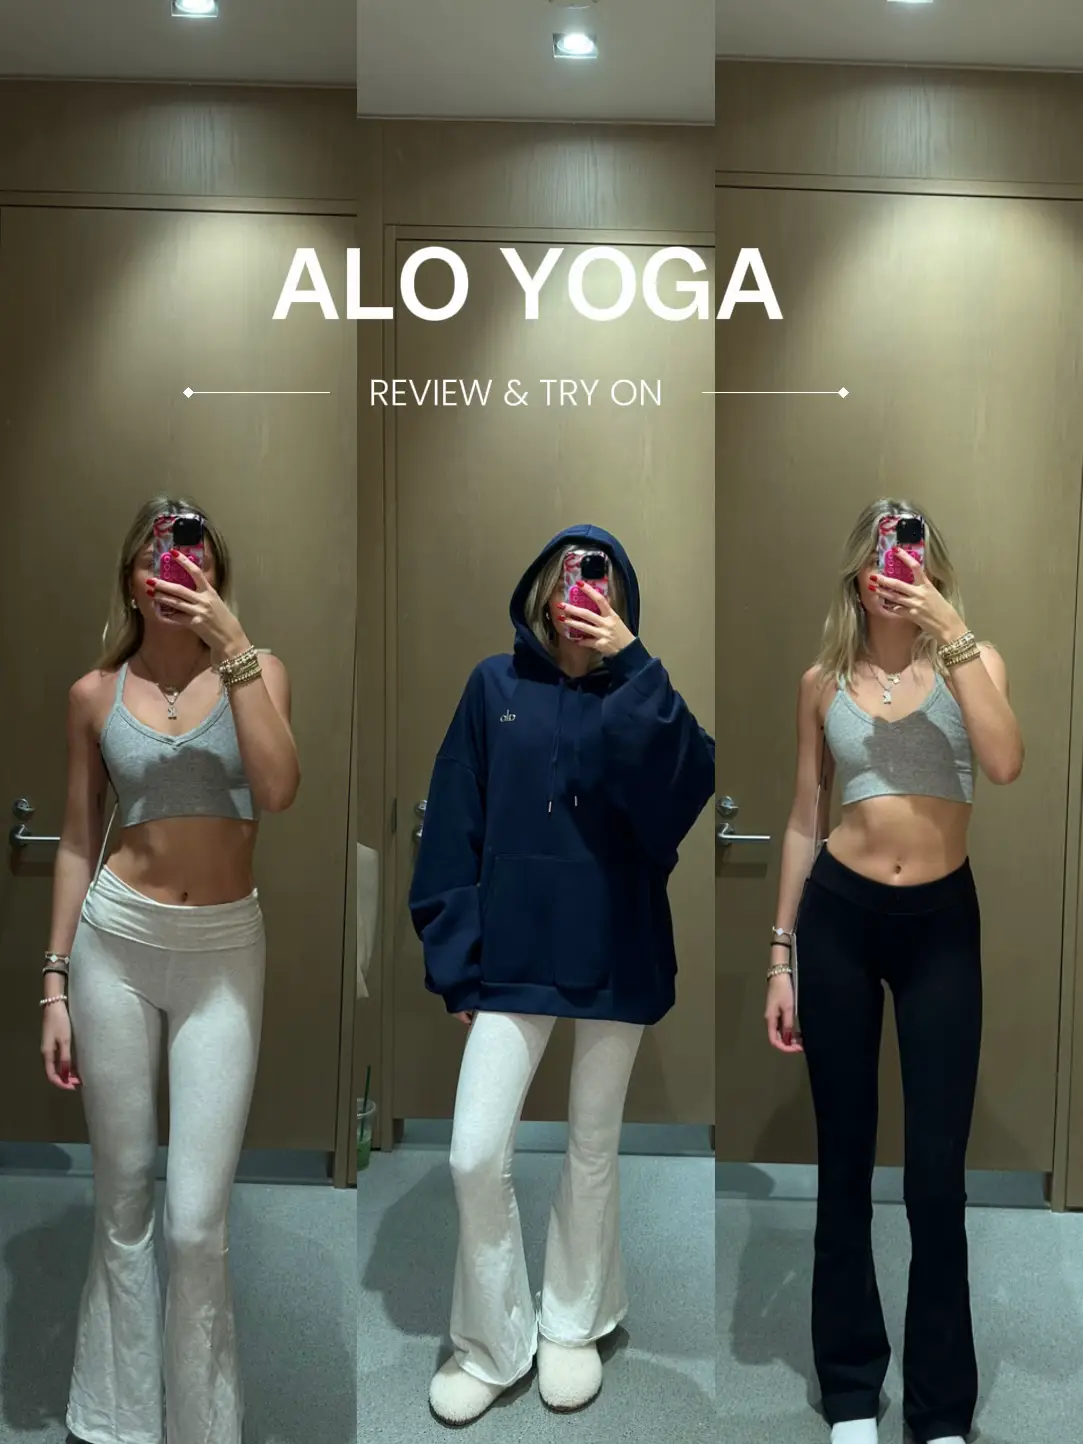 Alo yoga review & try on, Gallery posted by Kylie Boyd